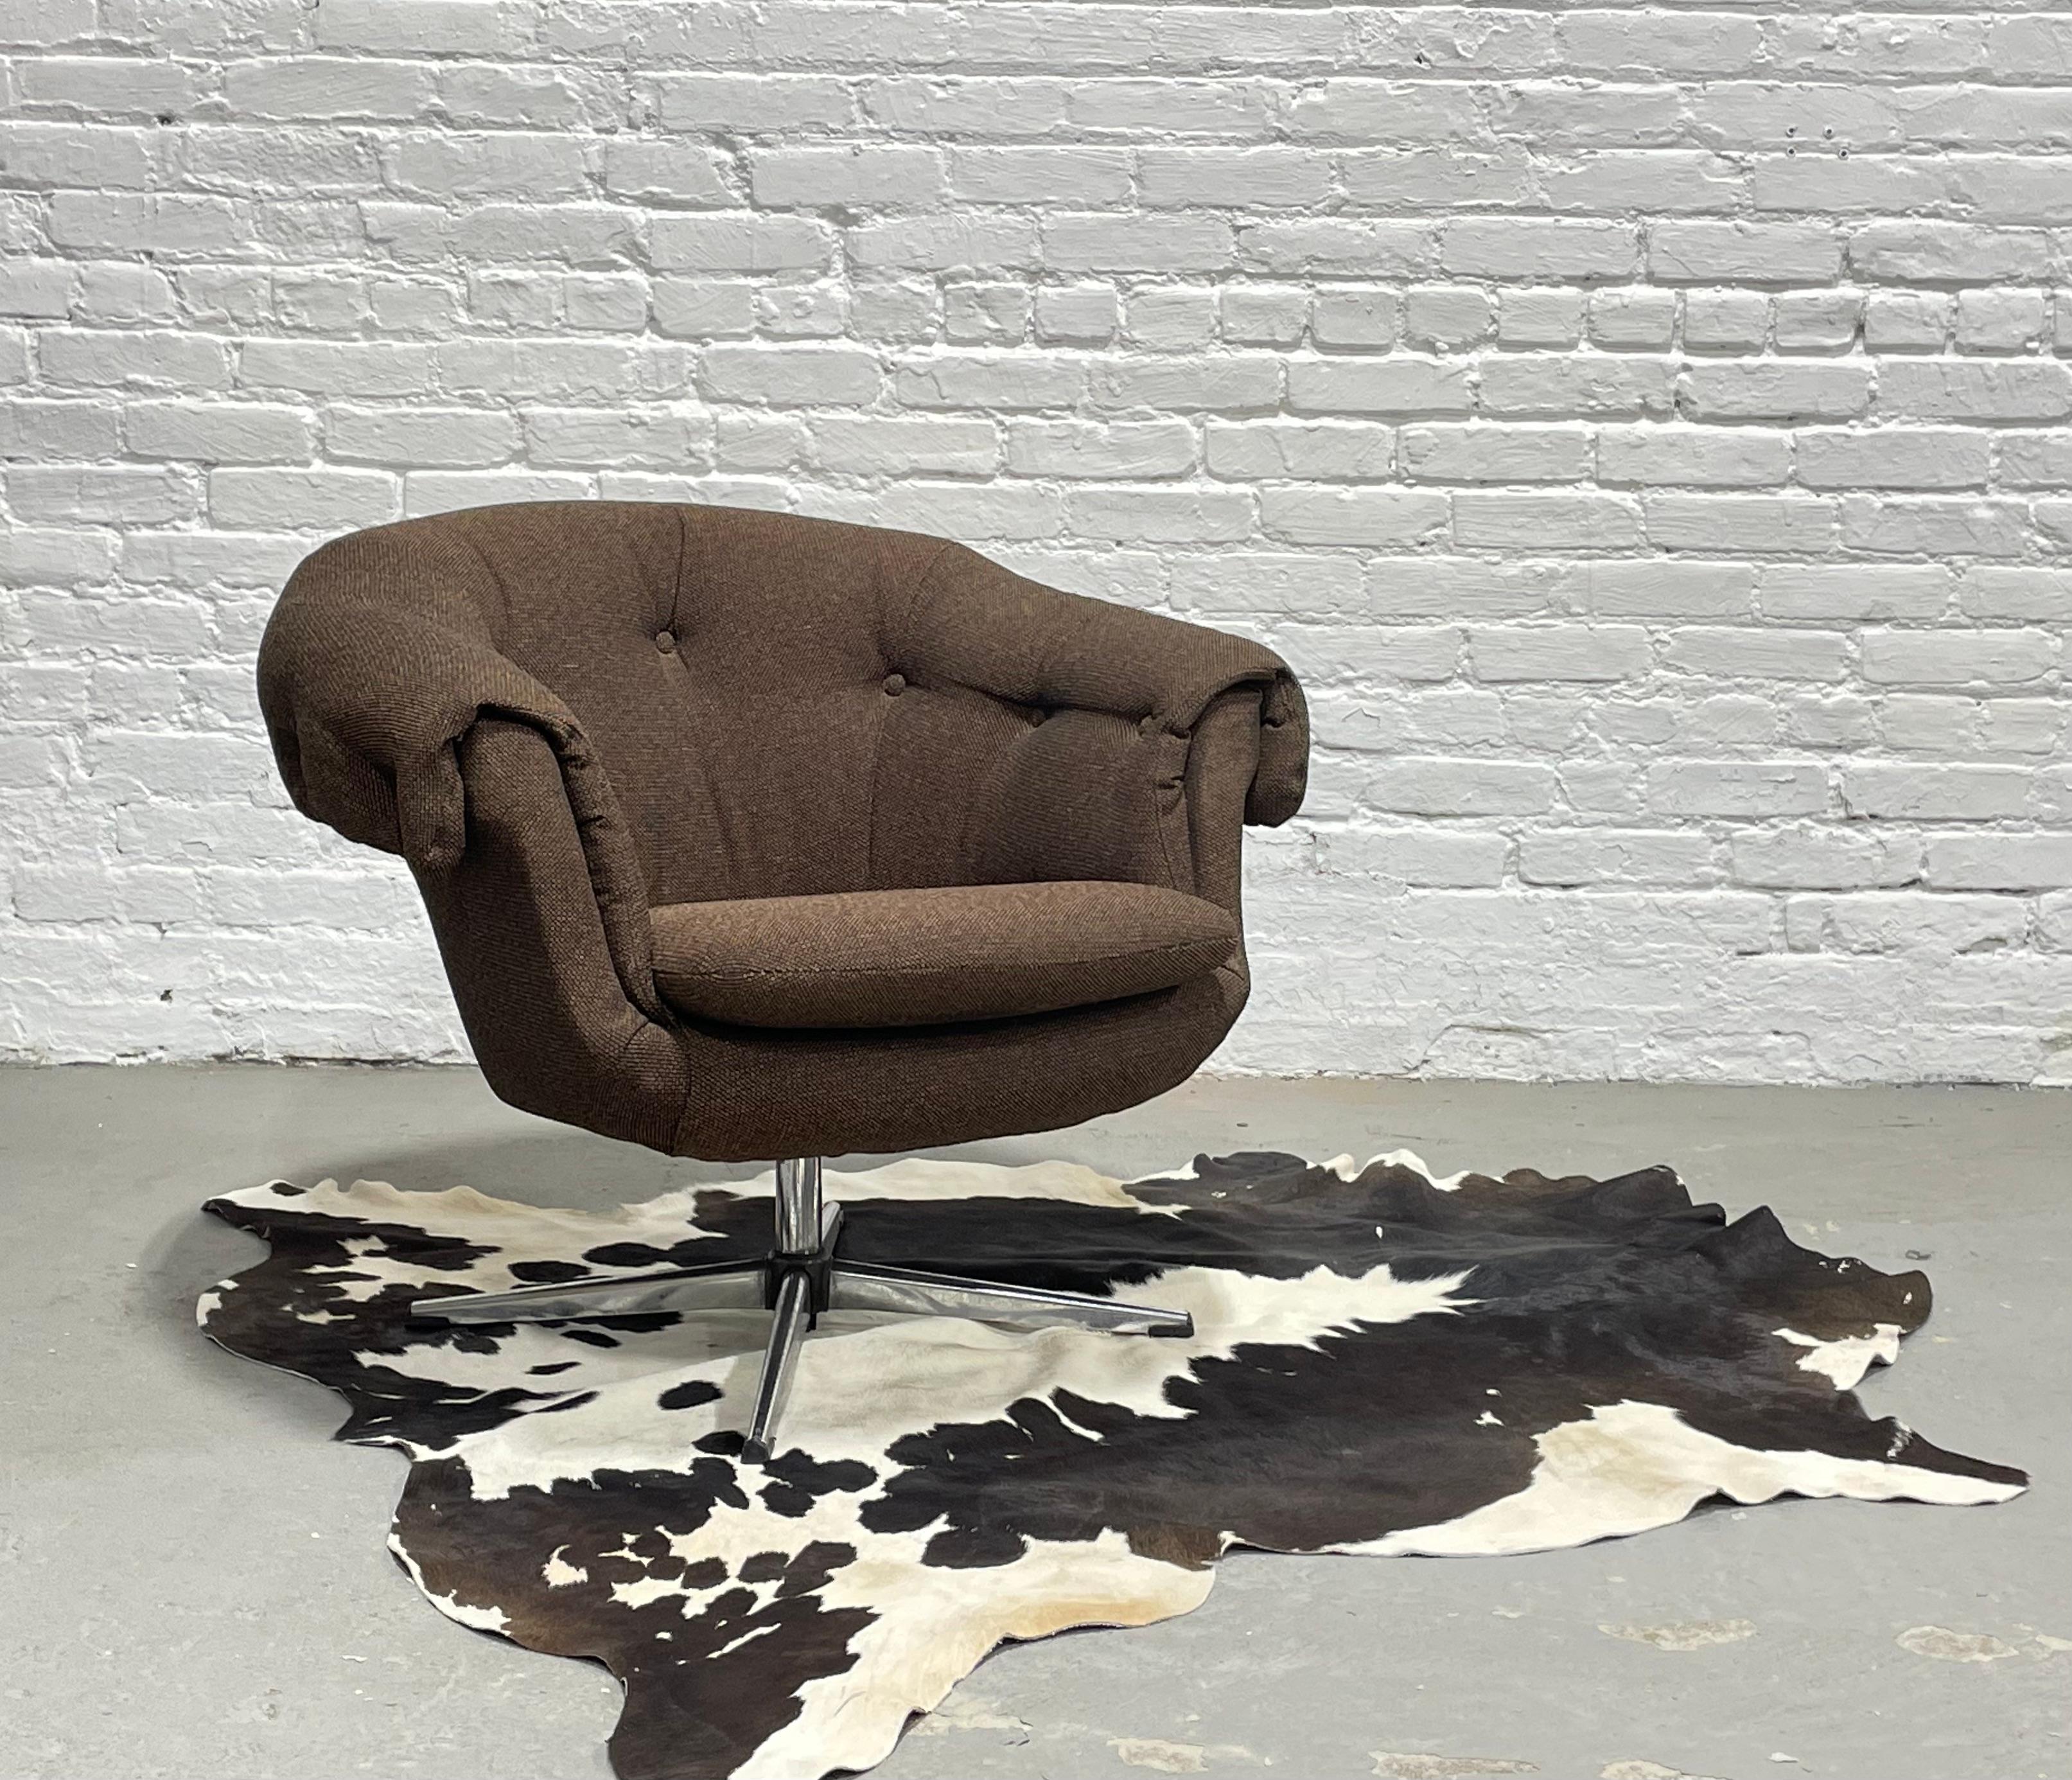 Mid-Century Modern molded styrofoam Tufted Overman pod chair upholstered in lovely textured brown fabric with matte chrome base. Chair swivels and is super comfortable. Lovely neutral brown color that is easy to match with most anything. Lightweight